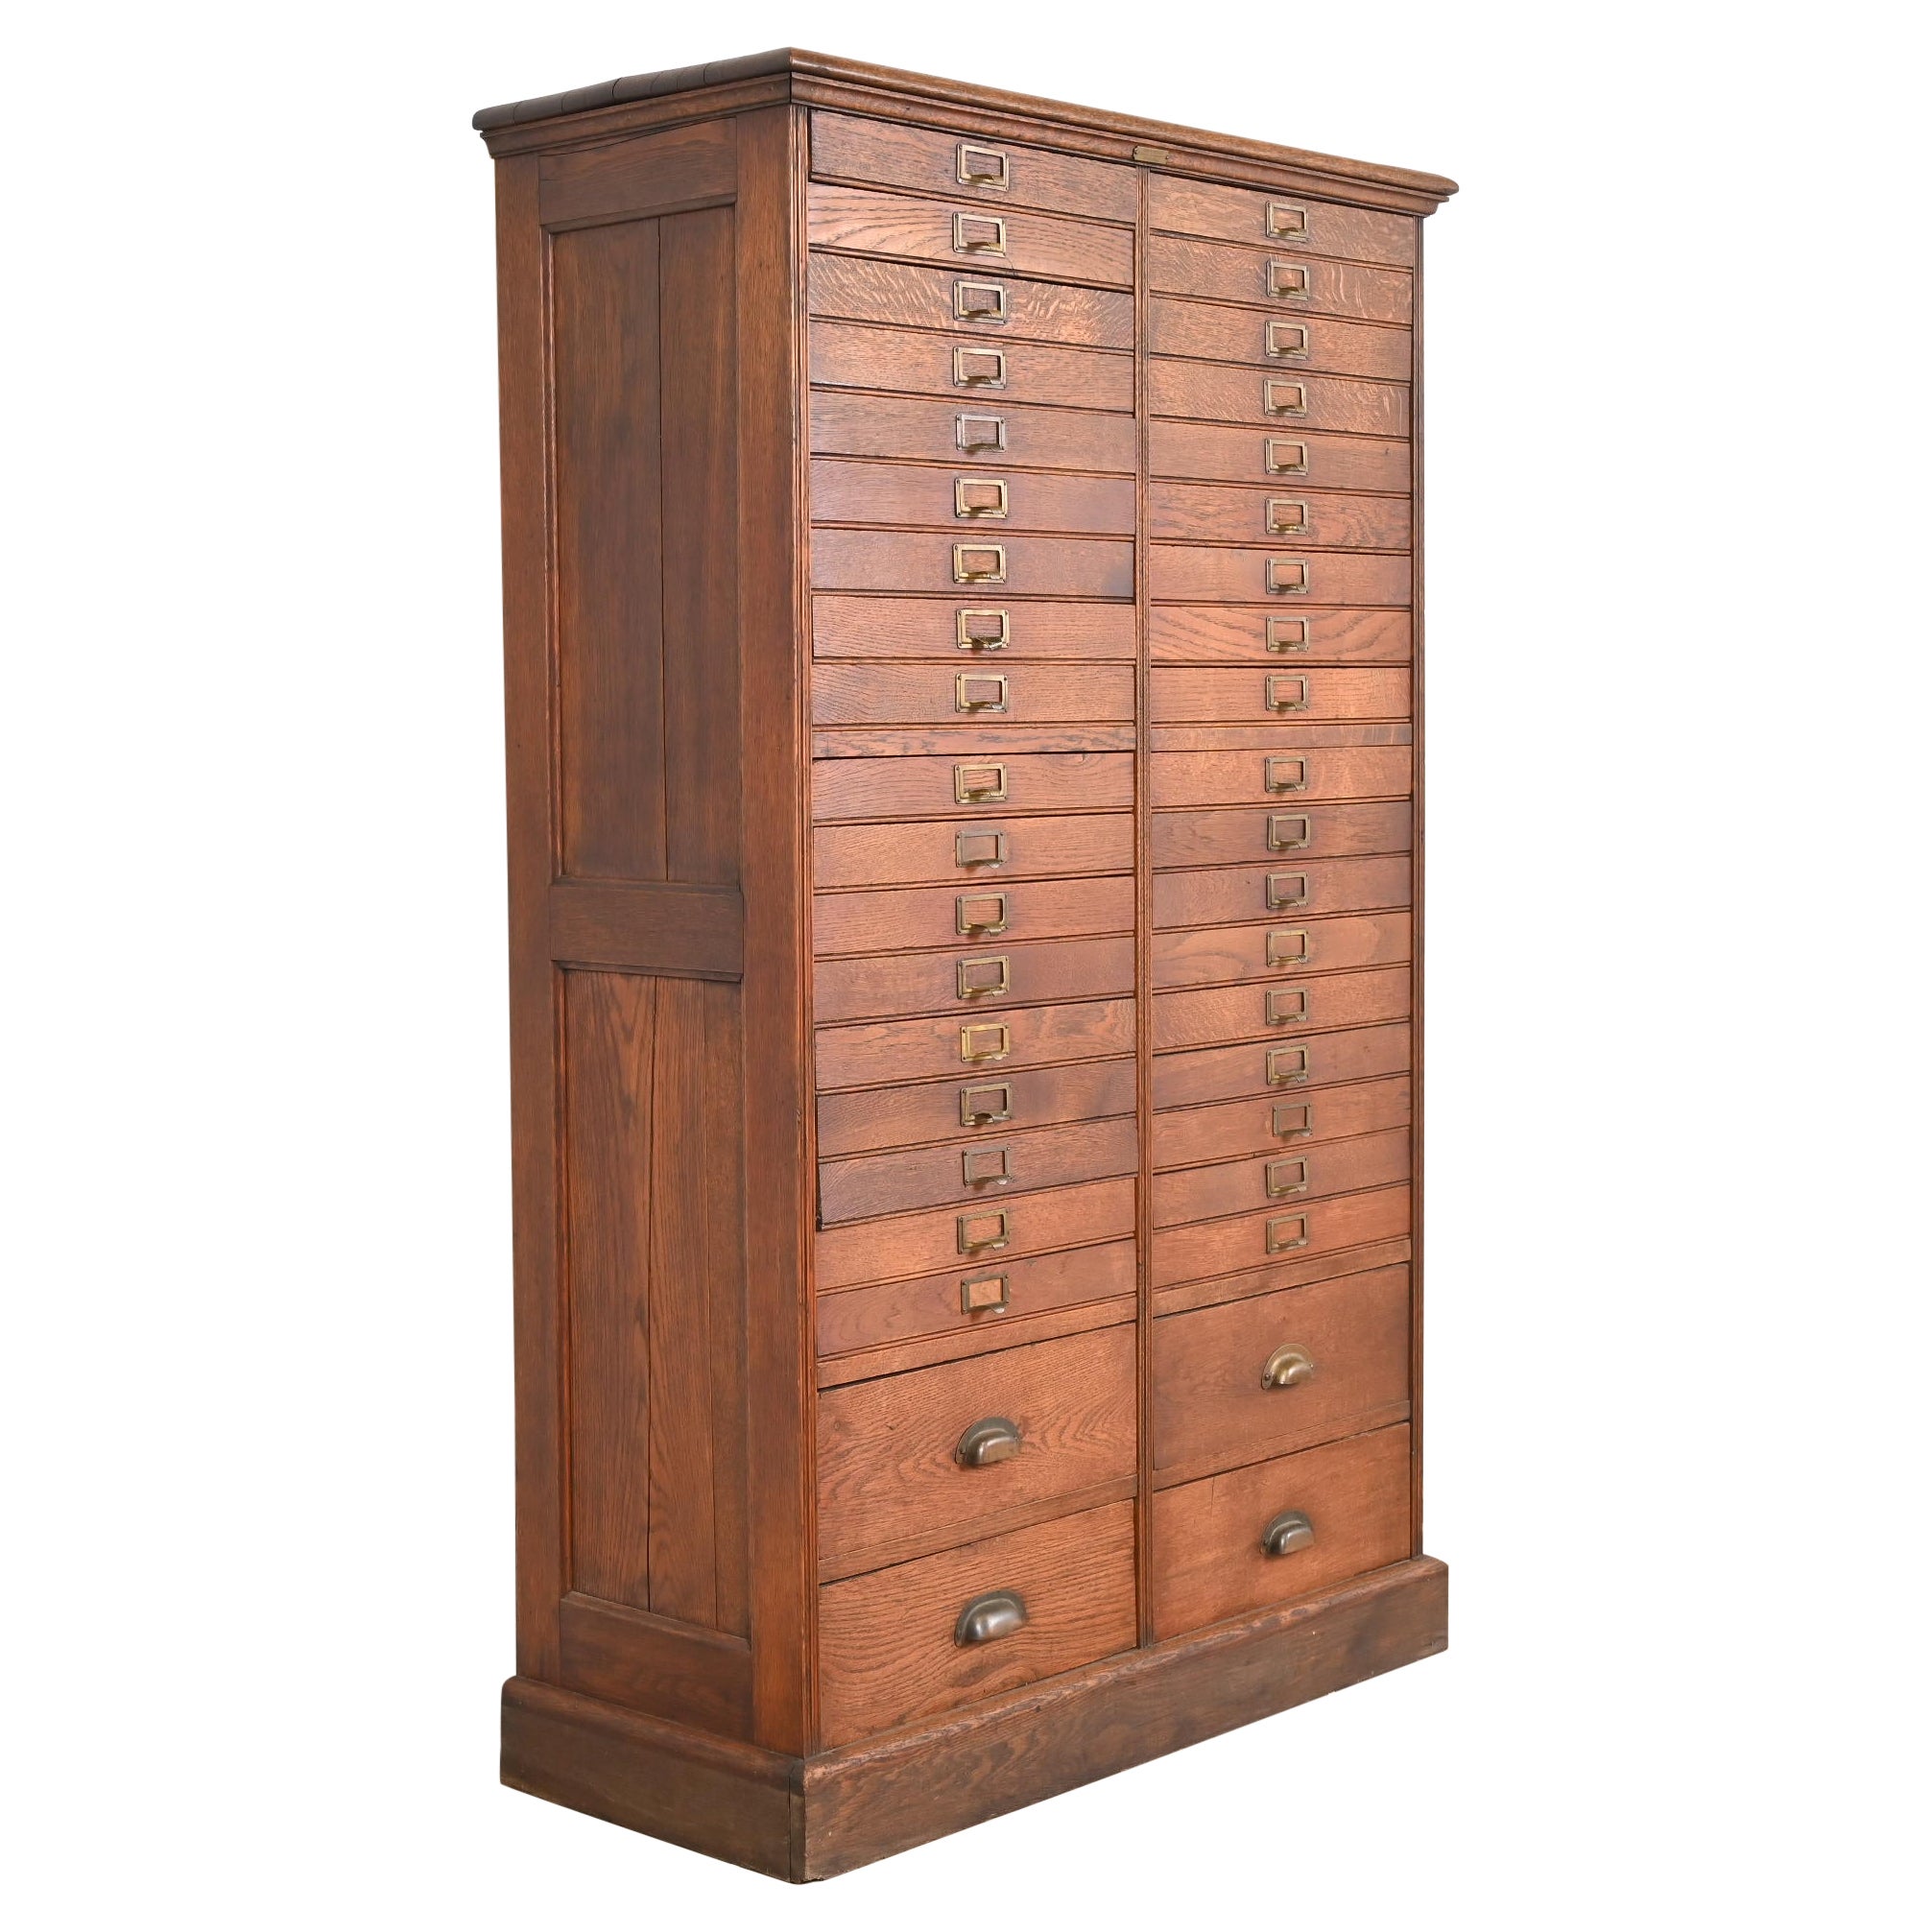 Antique Arts & Crafts Oak 40-Drawer File Cabinet or Chest of Drawers, Circa 1900 For Sale